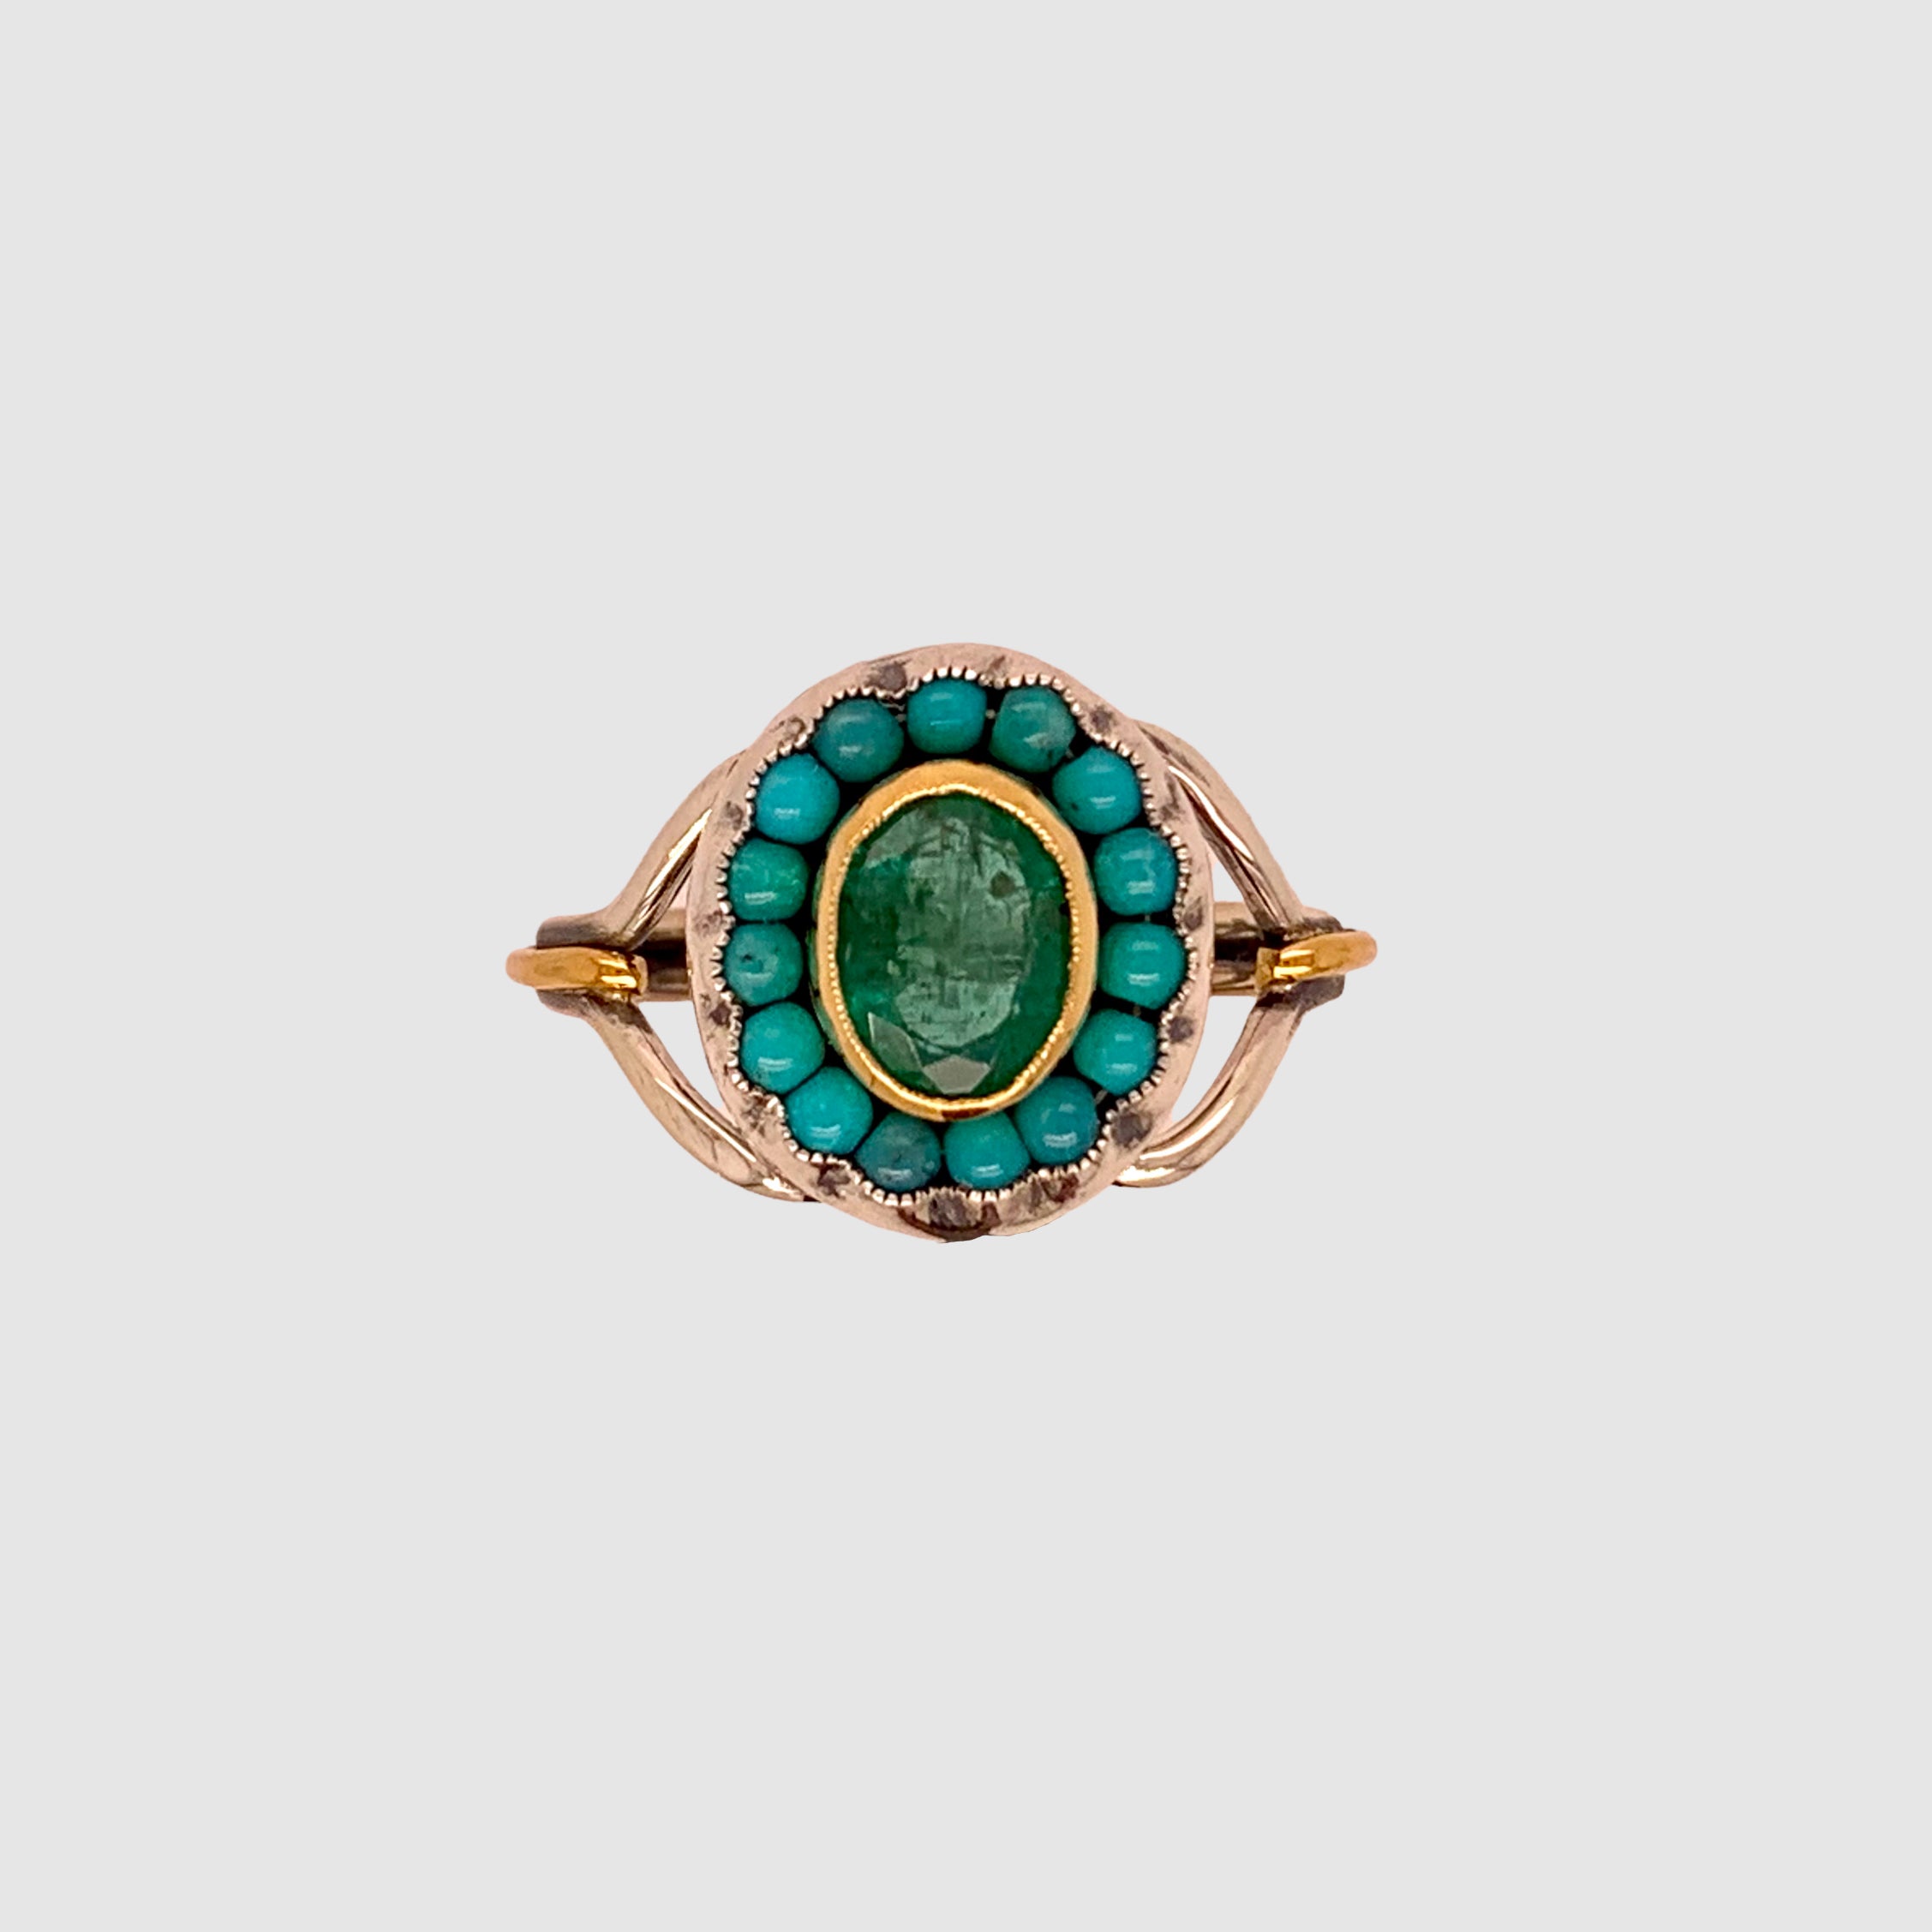 HEIRLOOM RING // TURQUOISE // GREEN EMERALD